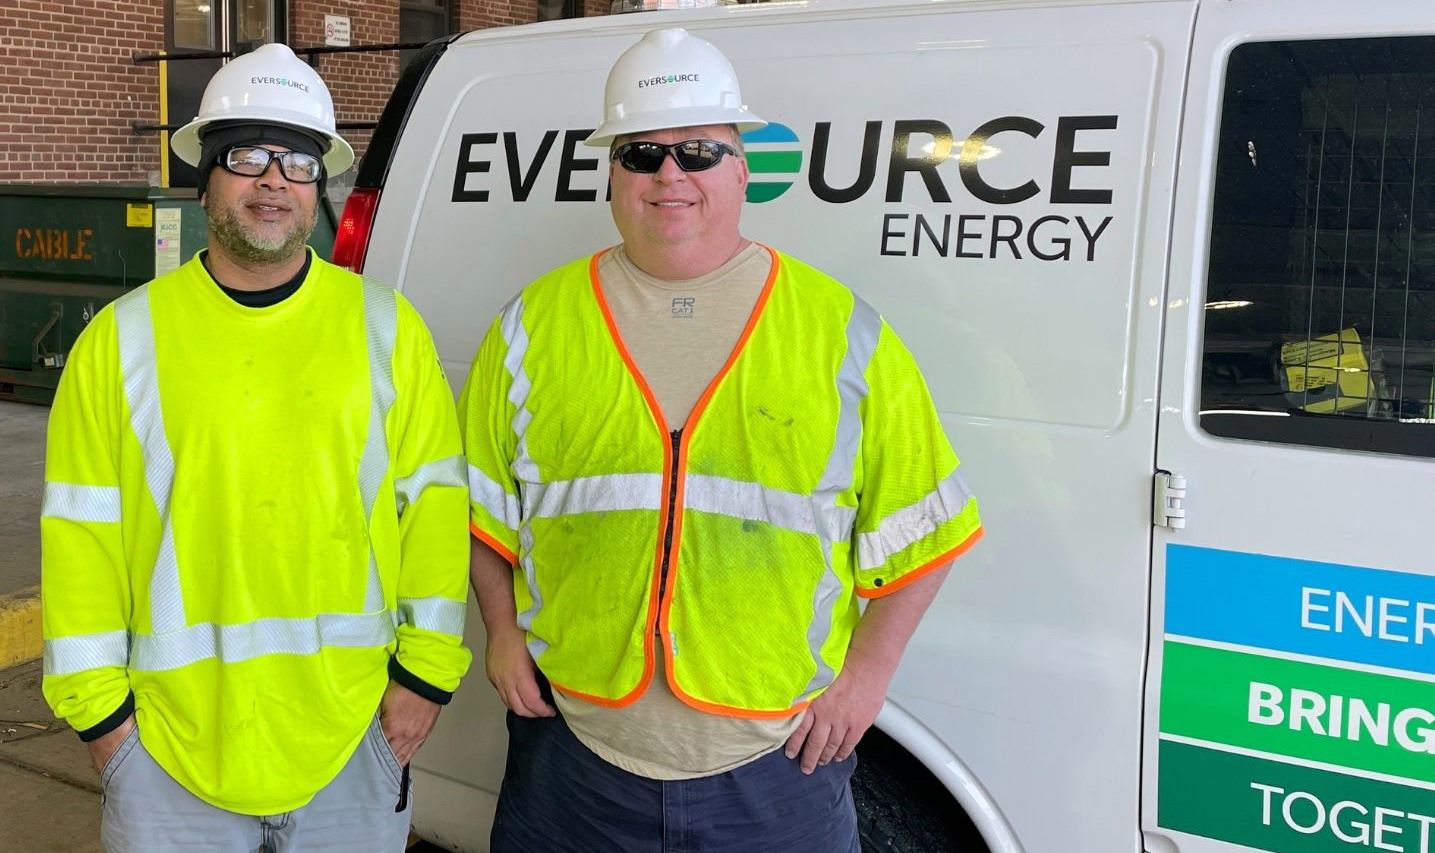 Vinny Foxx (left) and Sean Tierney pose in front of an Eversource van.